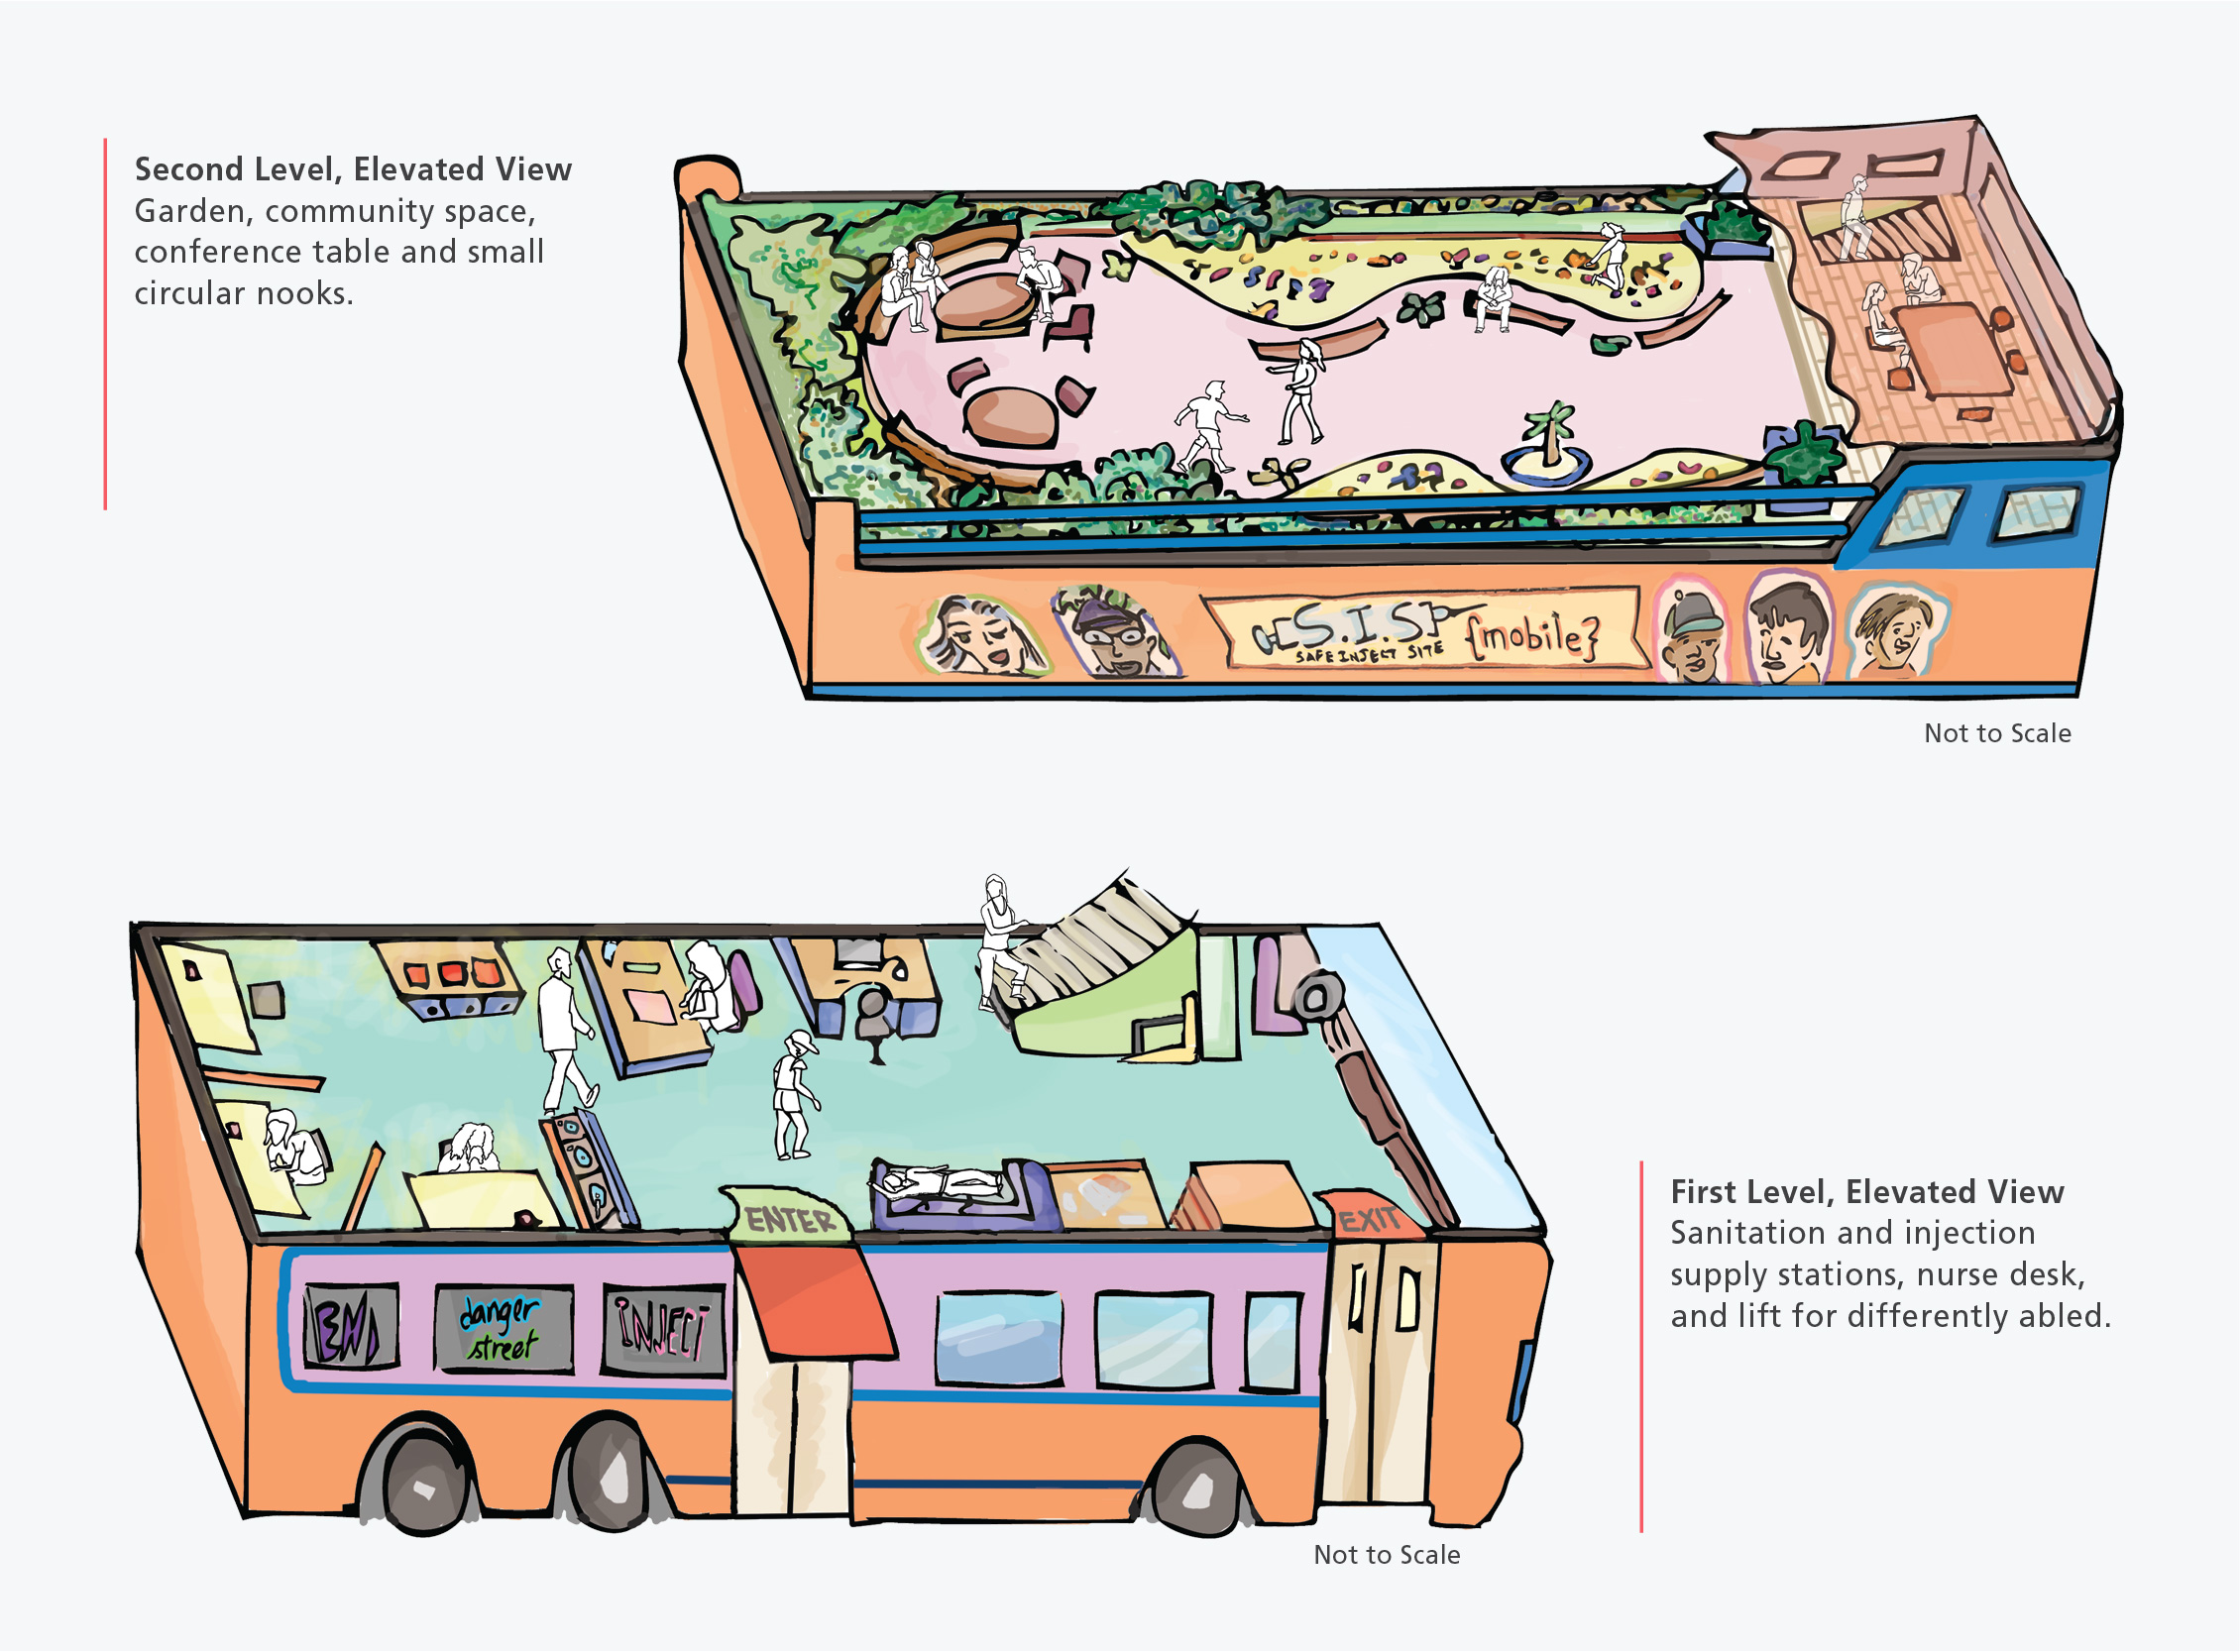 Isometric view of a speculative mobile safe injection site (SIS)